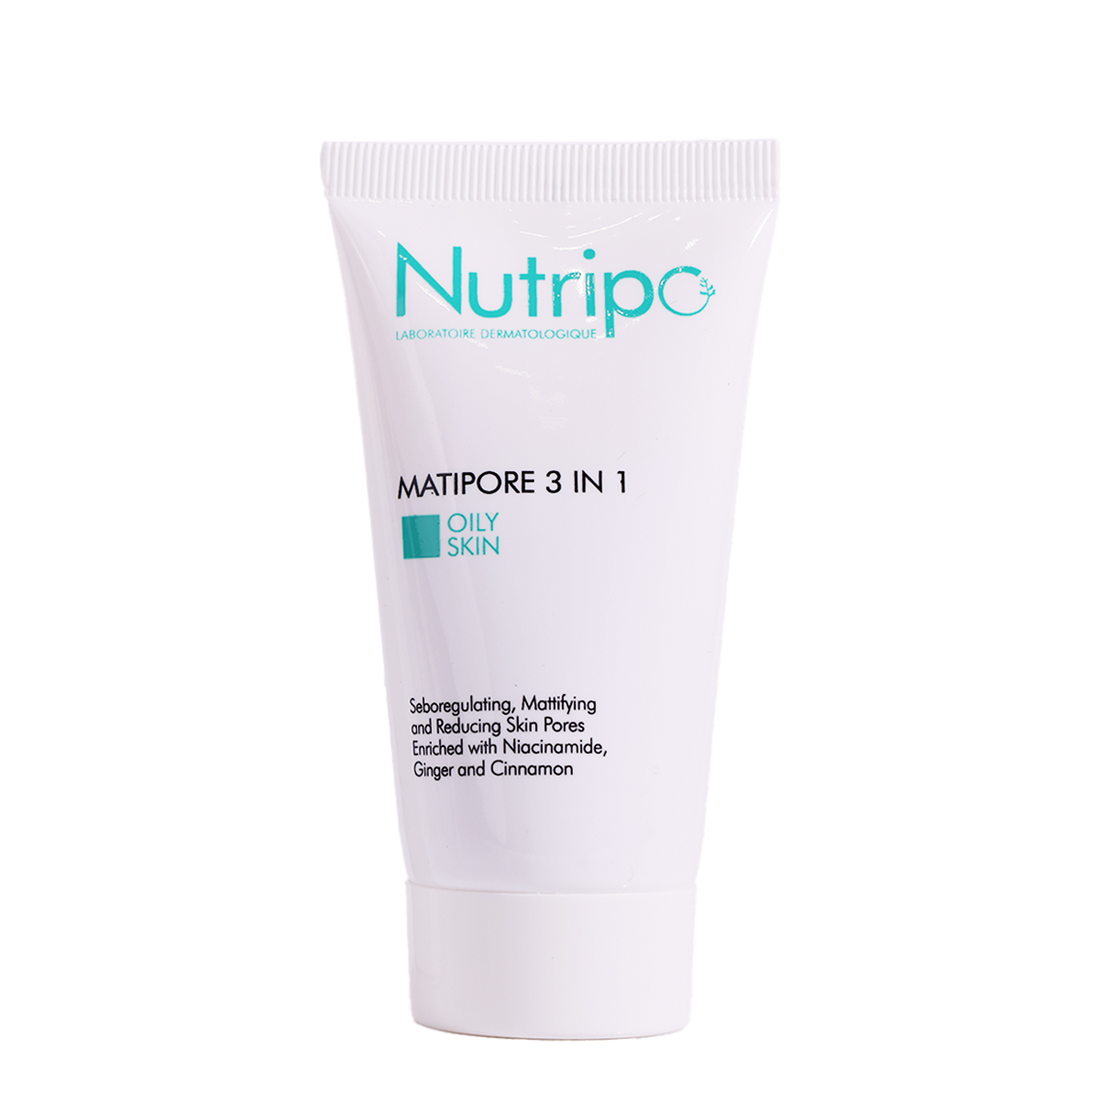 Matipore 3 In 1 50 mL from Nutripo